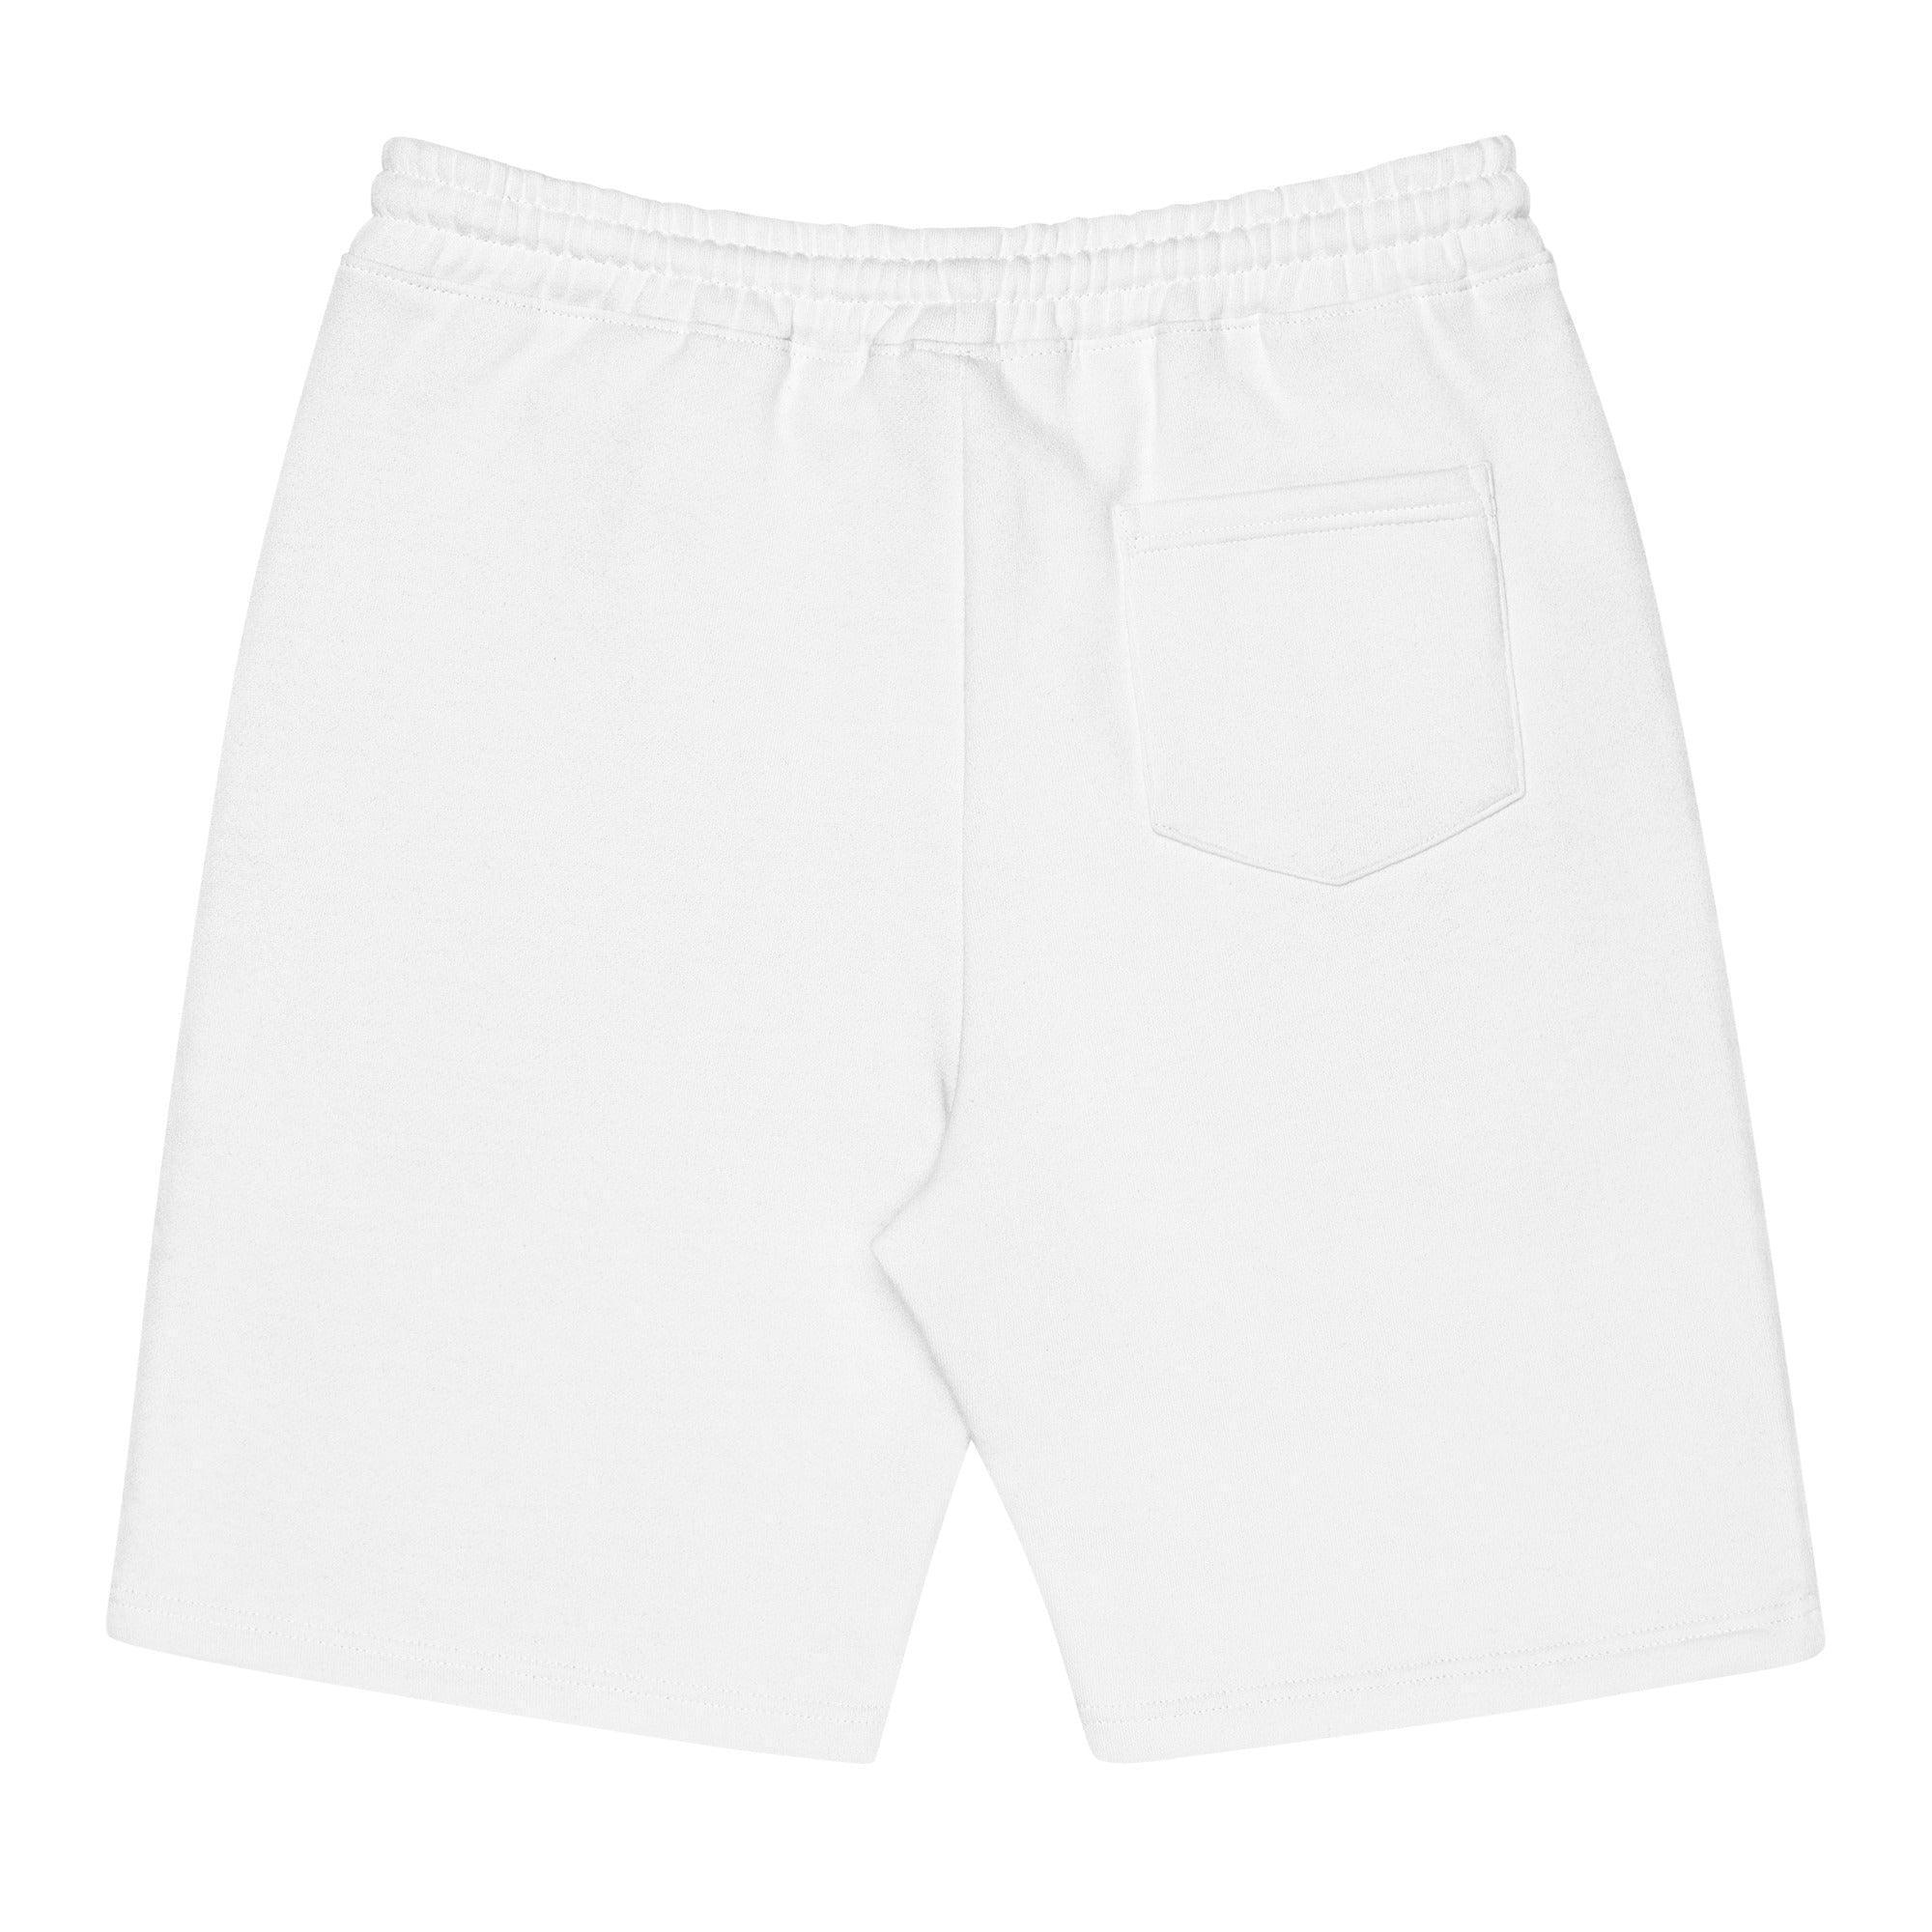 Game Stop | Wall Street Fleece Shorts - InvestmenTees